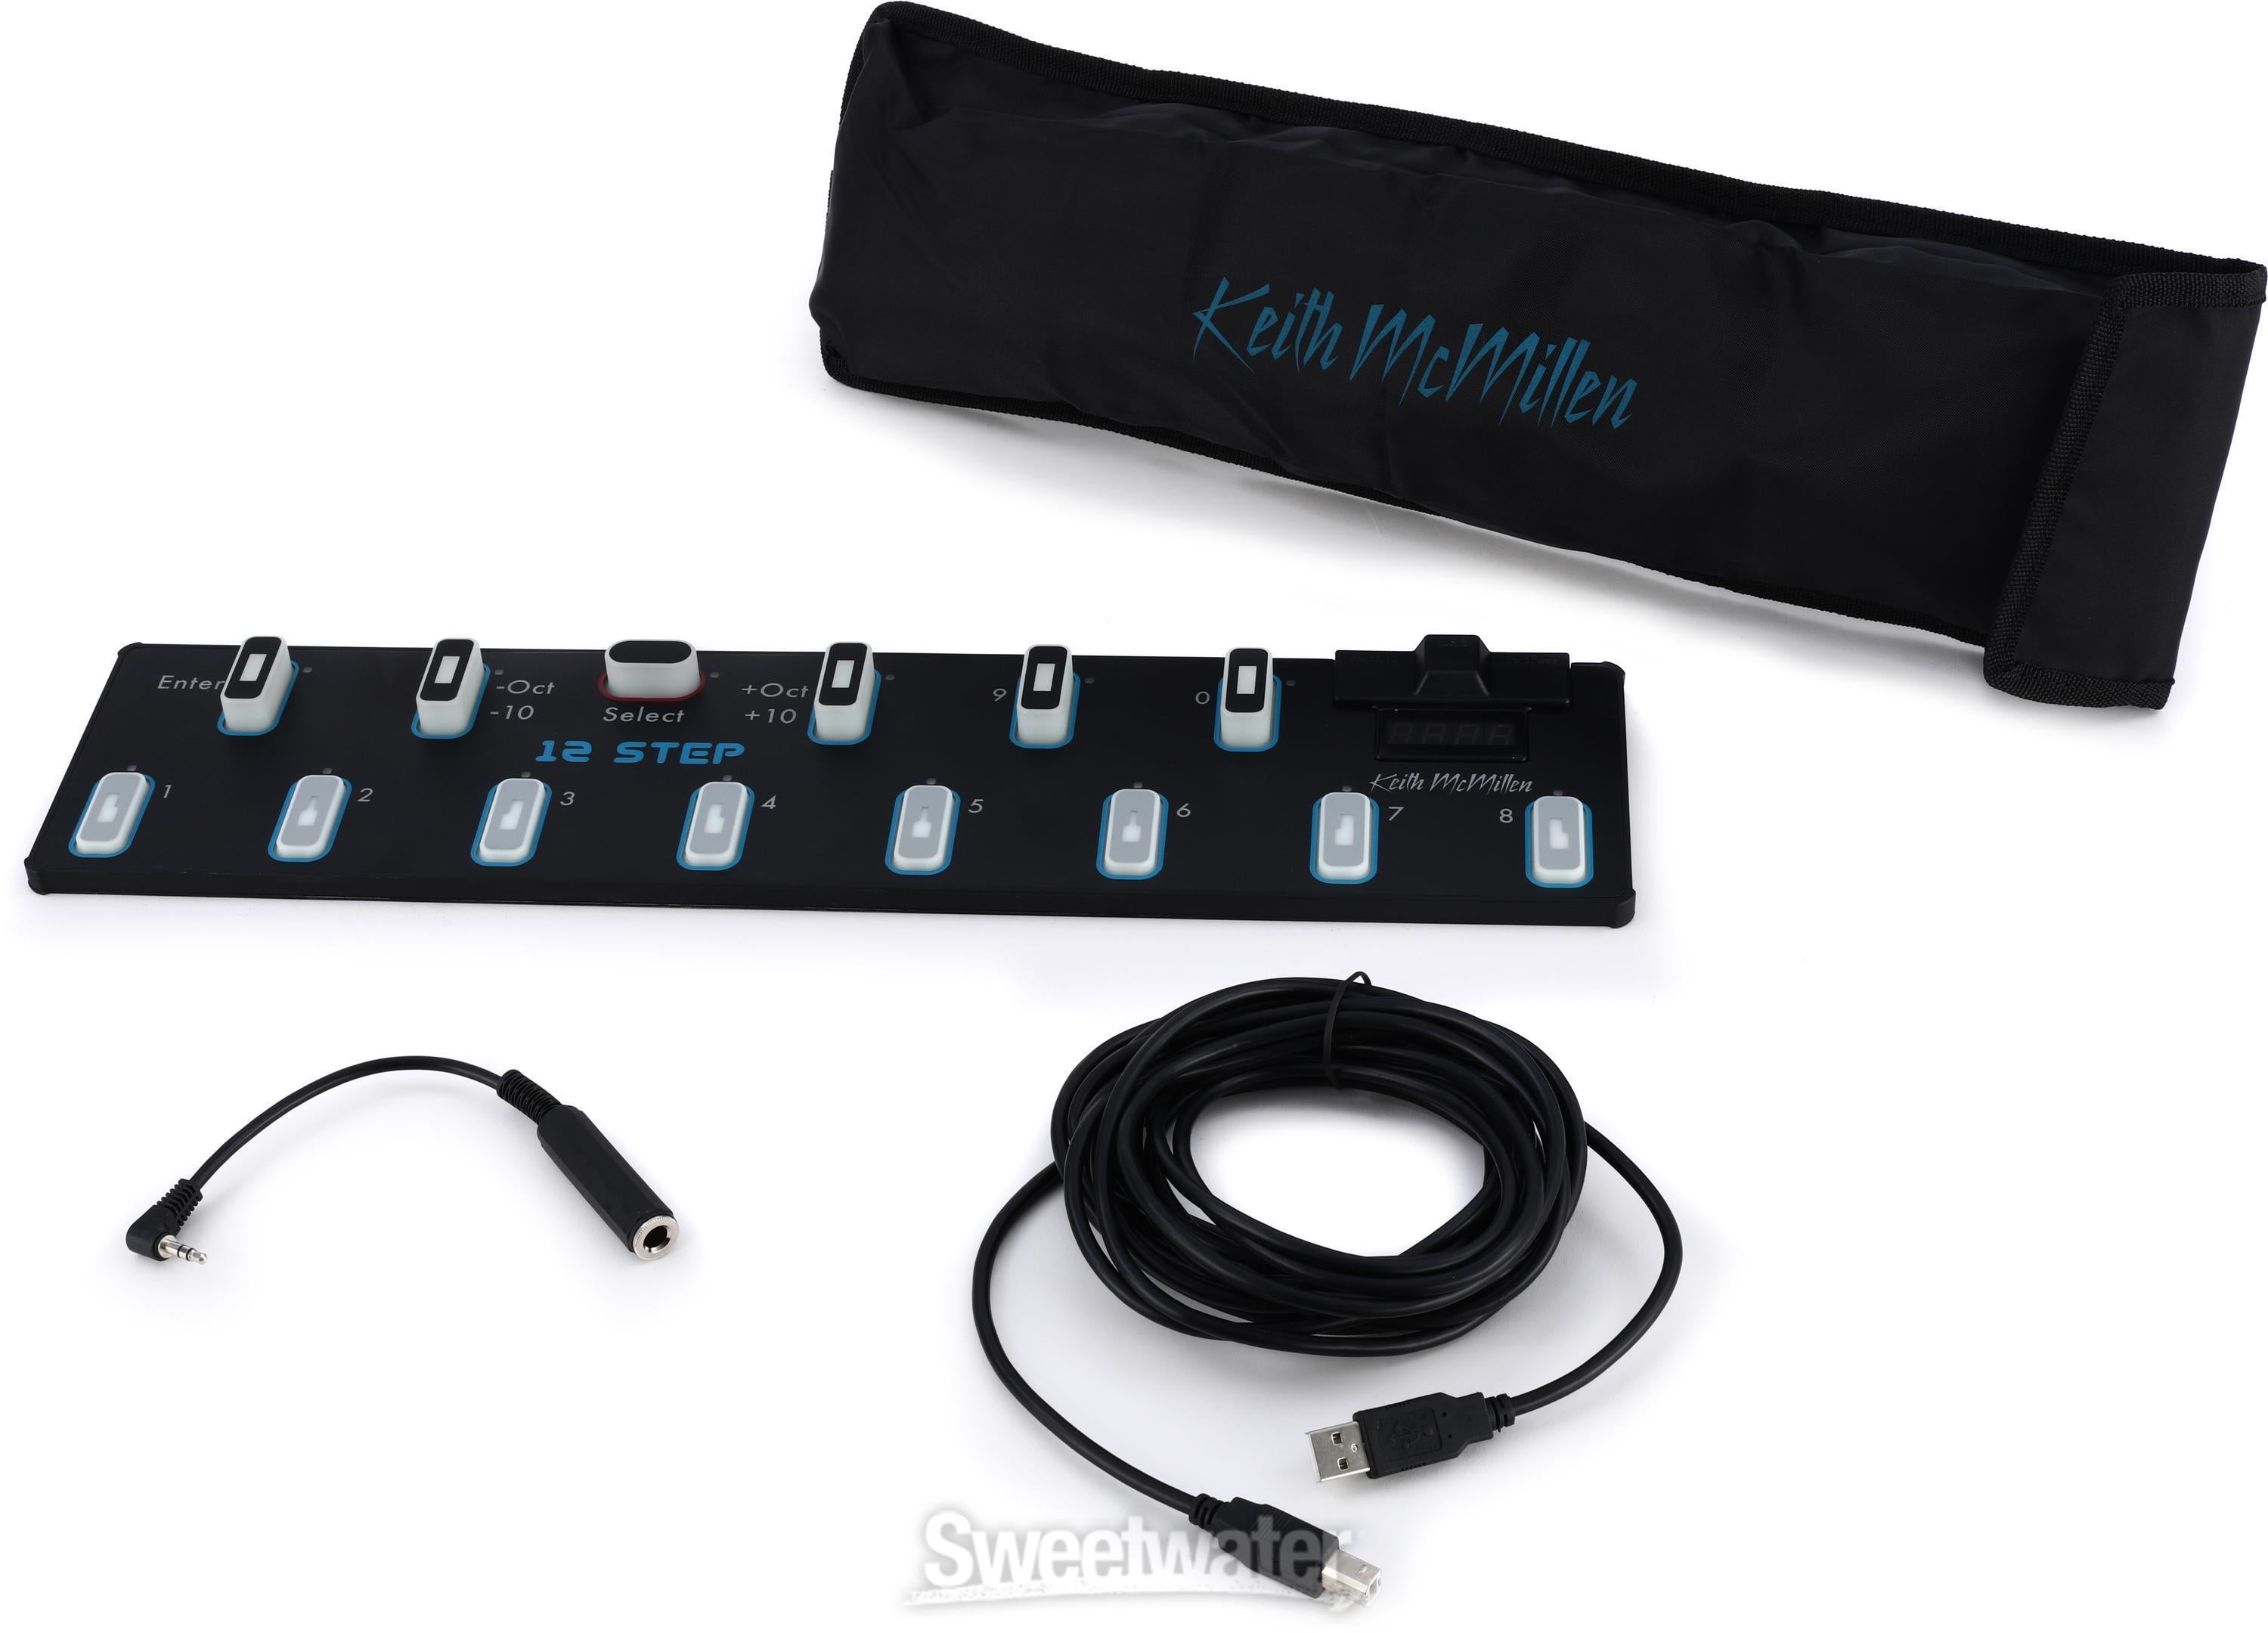 Keith McMillen Instruments 12 Step USB MIDI Bass Pedal Foot 